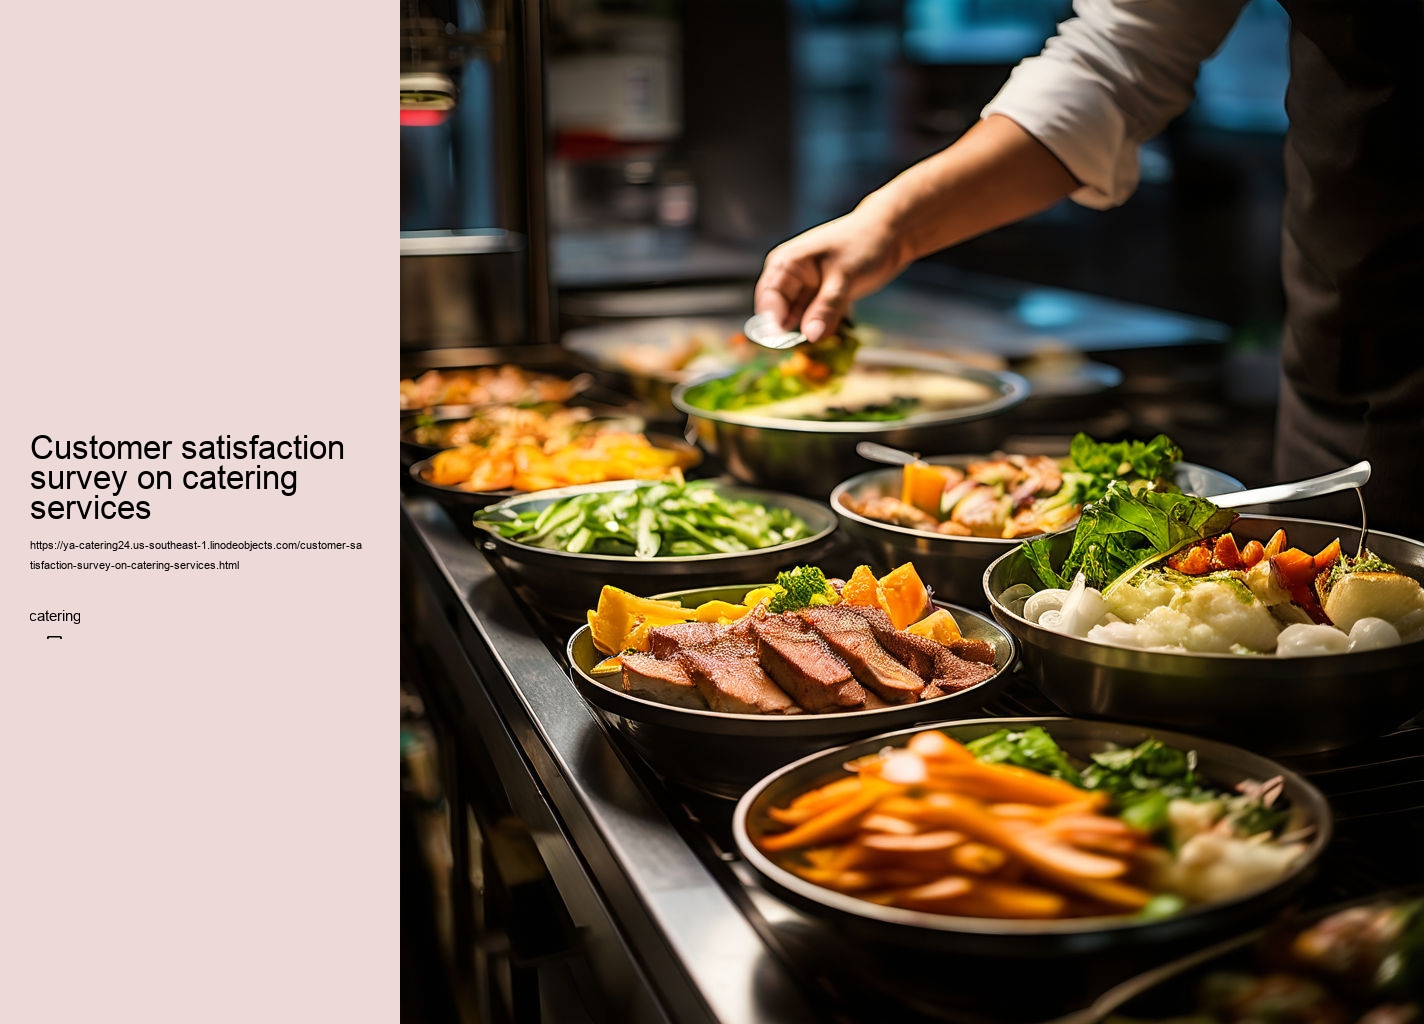 Customer satisfaction survey on catering services